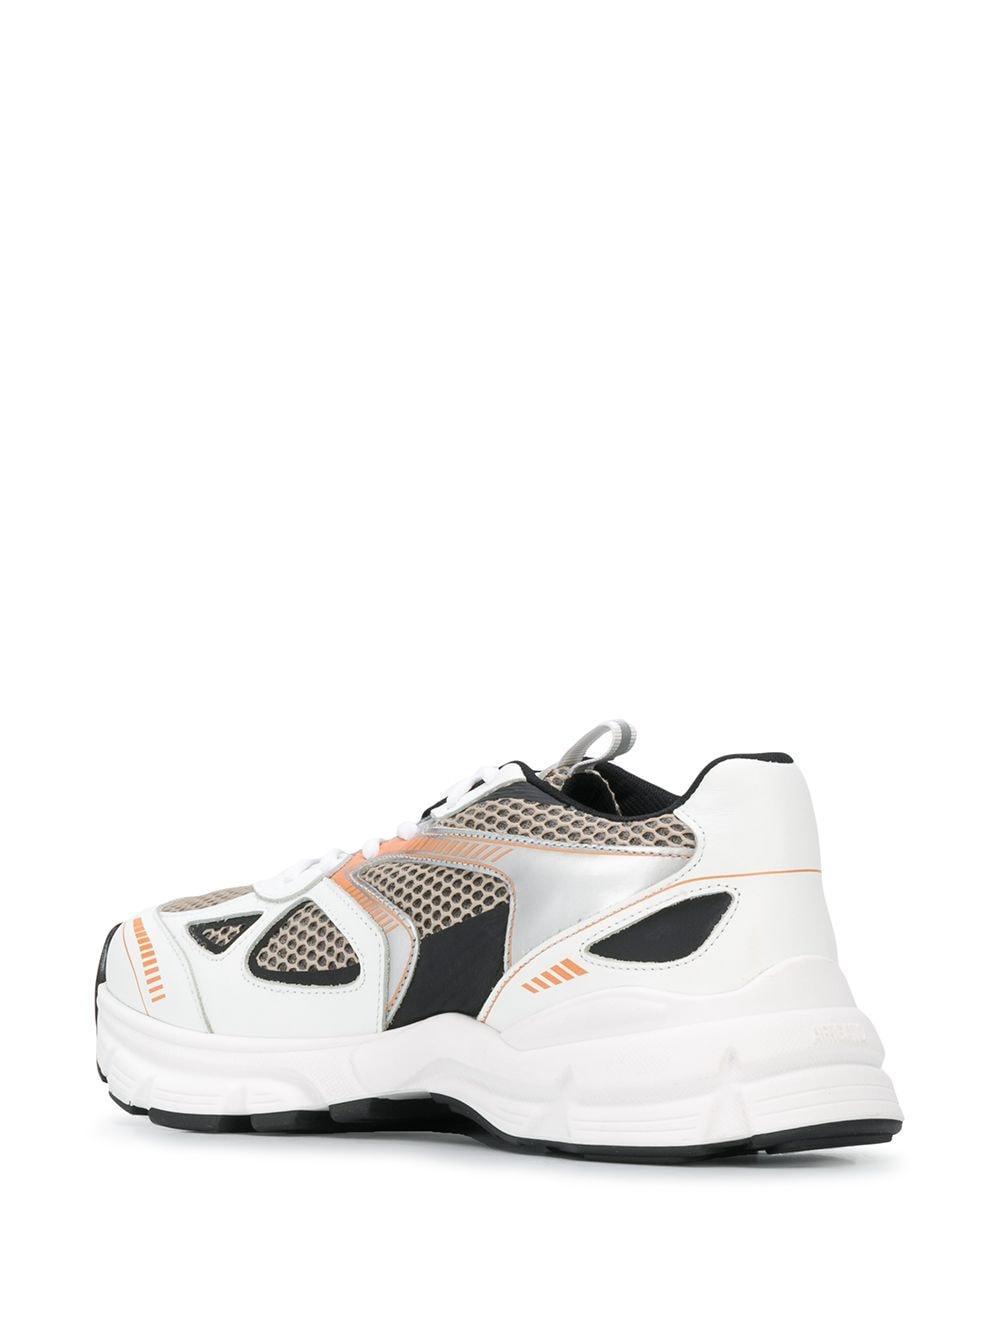 Axel Arigato Leather Marathon Runner Low Top Sneakers in White - Lyst